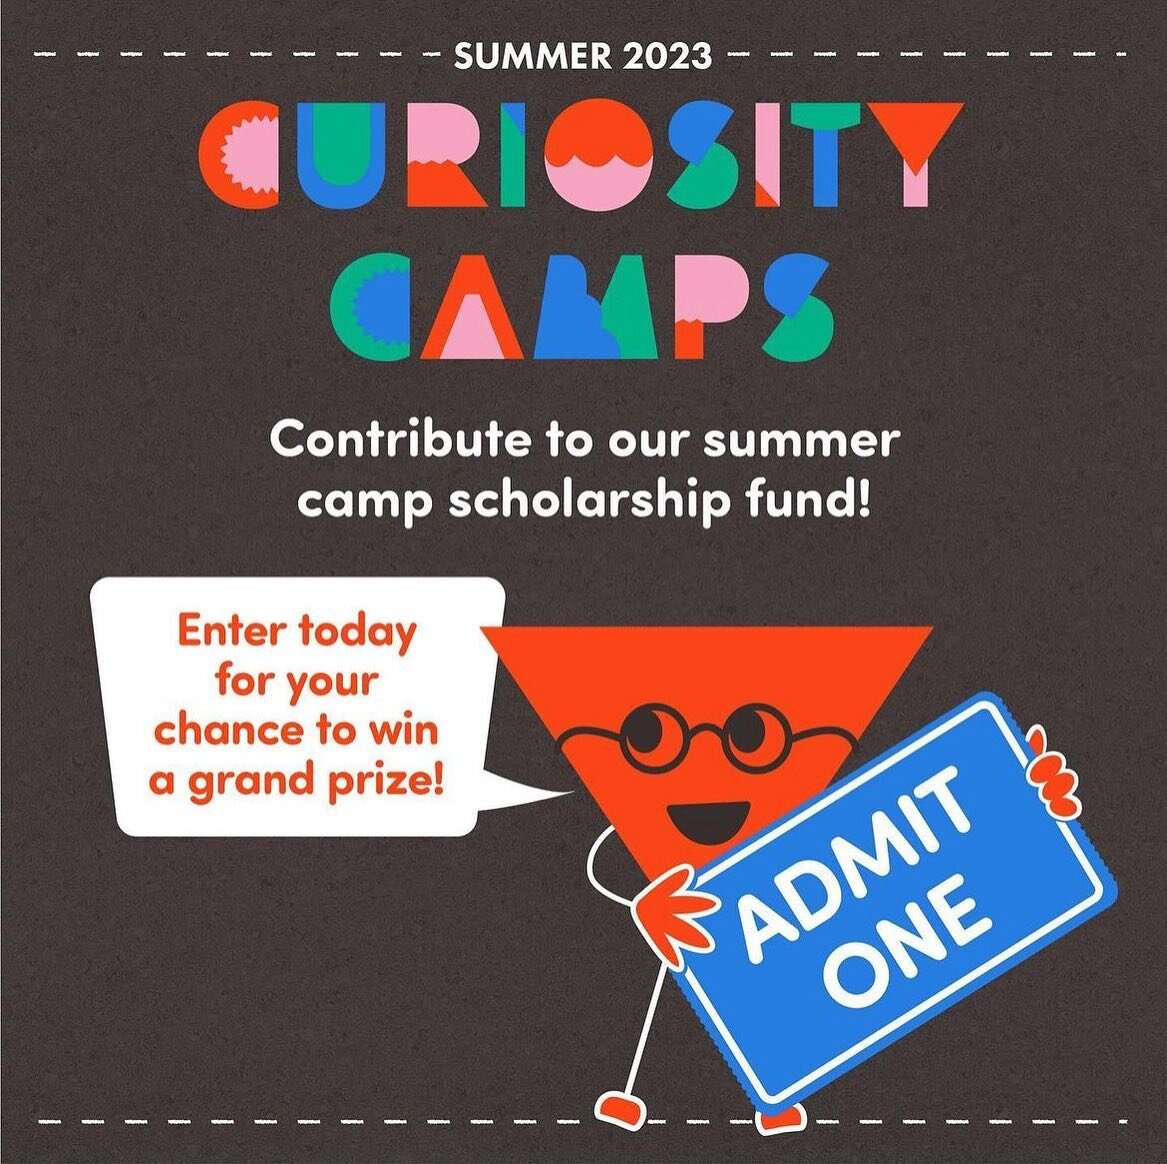 Contribute to our summer camp scholarship fund 📣 Enter today for your chance to win a grand prize!

All donations will benefit youth attending our summer programming. 
How to enter: 
Send your entry to @curiositystudio_ on Venmo including your email